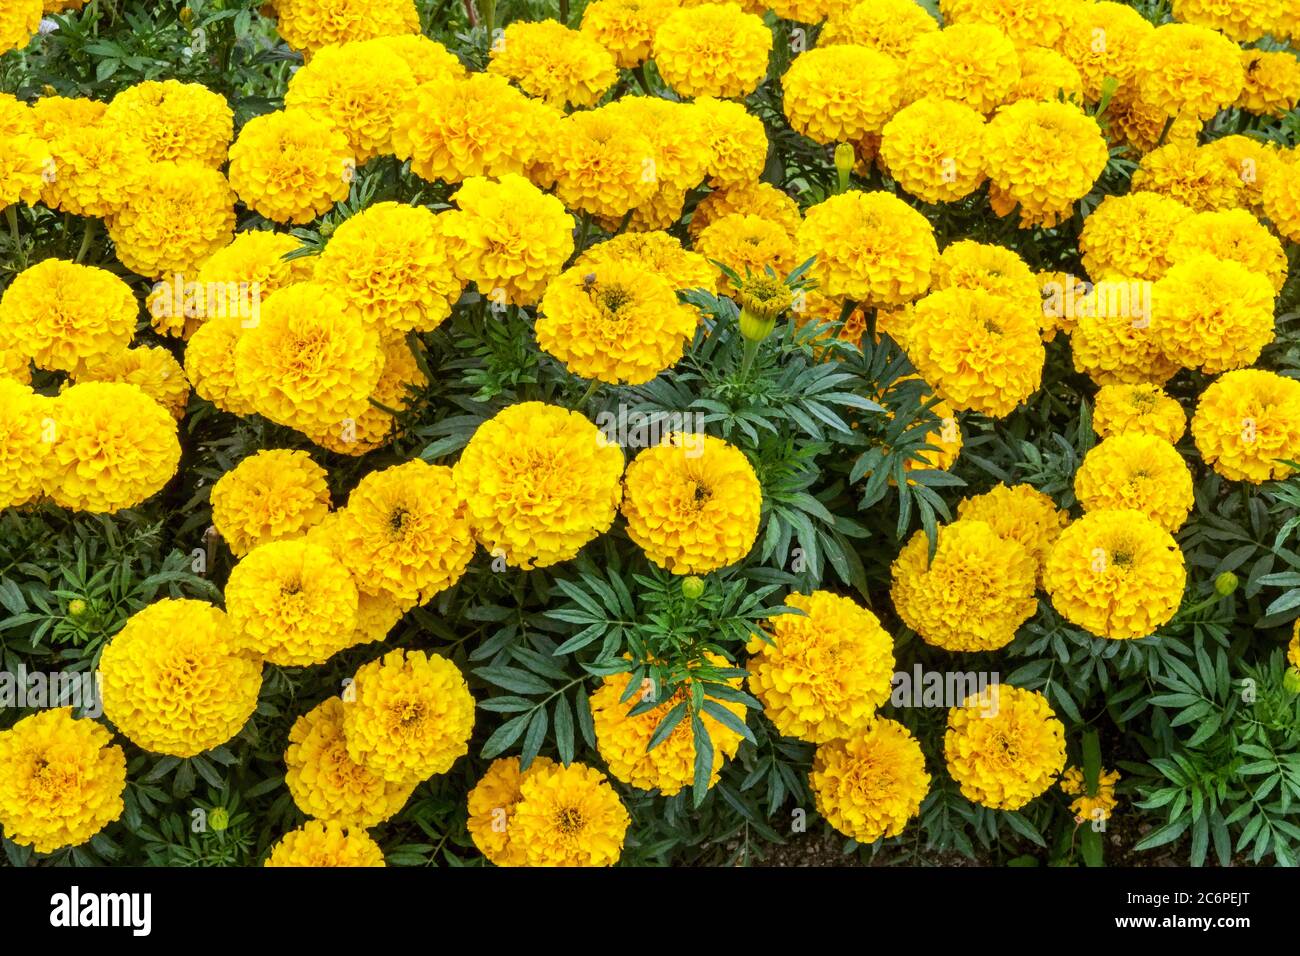 Yellow Marigold Tagetes 'Gold Lady Tagetes erecta African Marigolds Bedding plants Yellow Tagetes Summer Garden Flowerbed Flowering Flowers Flower Bed Banque D'Images